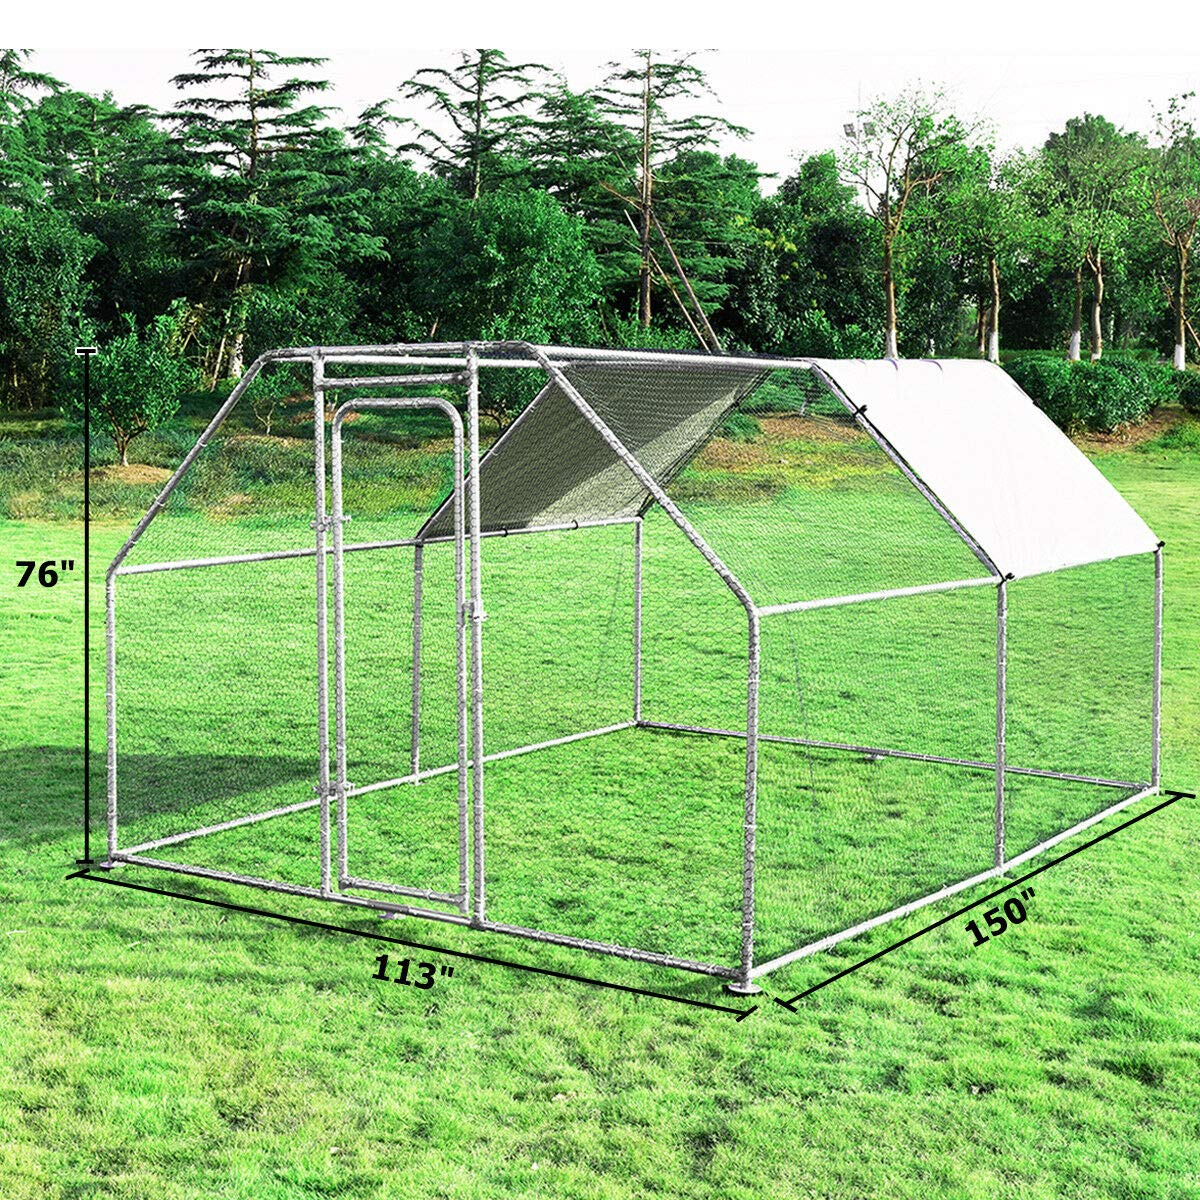 Large Metal Chicken Coop Walk-in Chicken Coops Hen Run House Shade Cage with Waterproof and Anti-Ultraviolet Cover for Outdoor Backyard